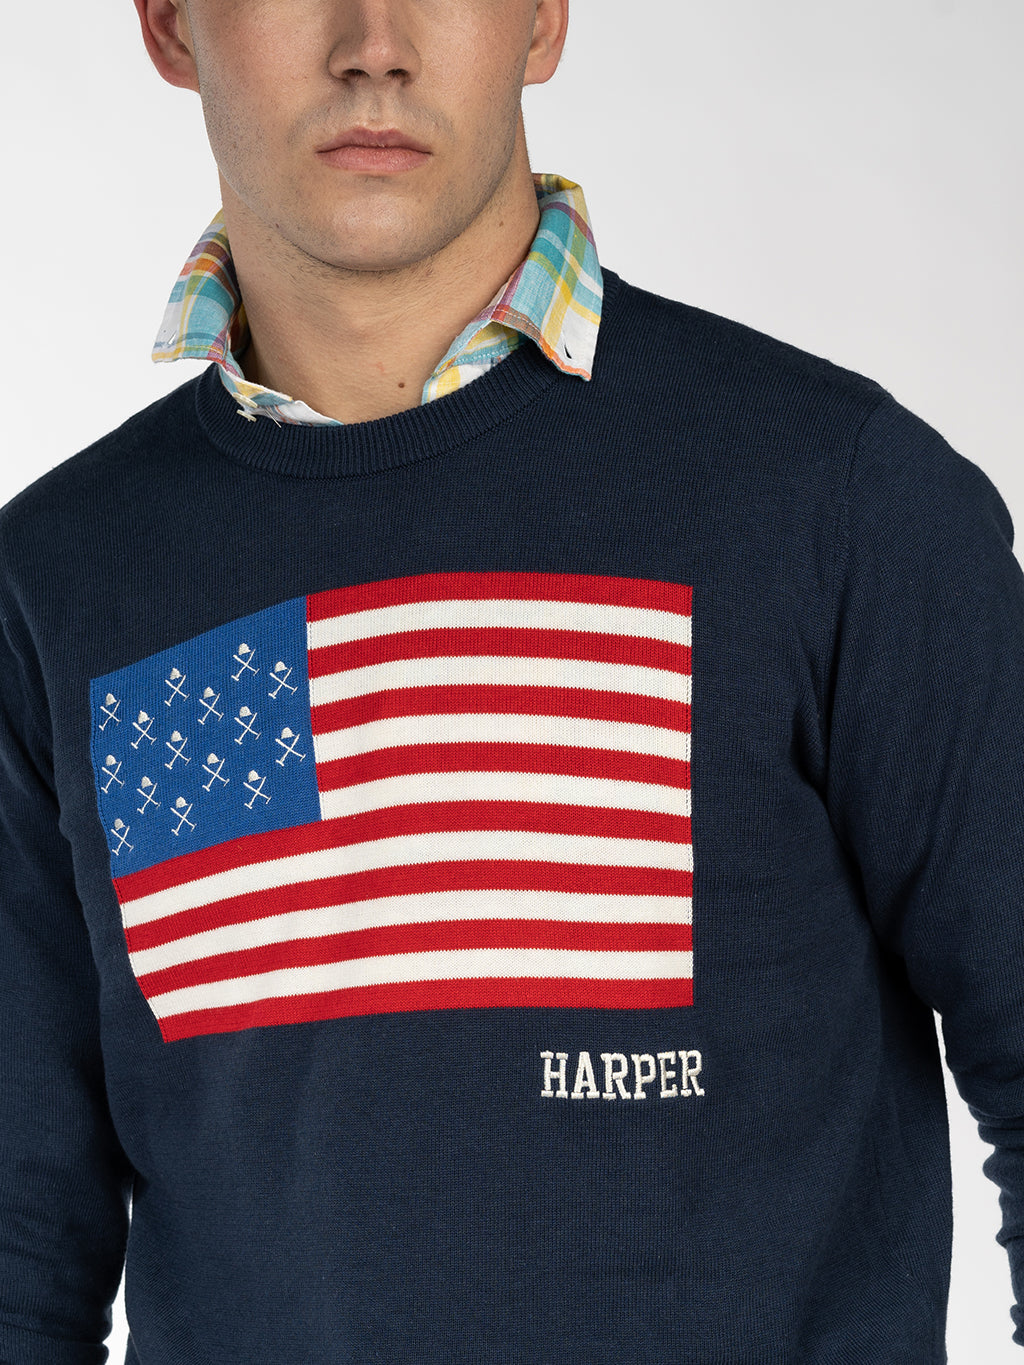 UNITED STATES JERSEY-Harper and Neyer